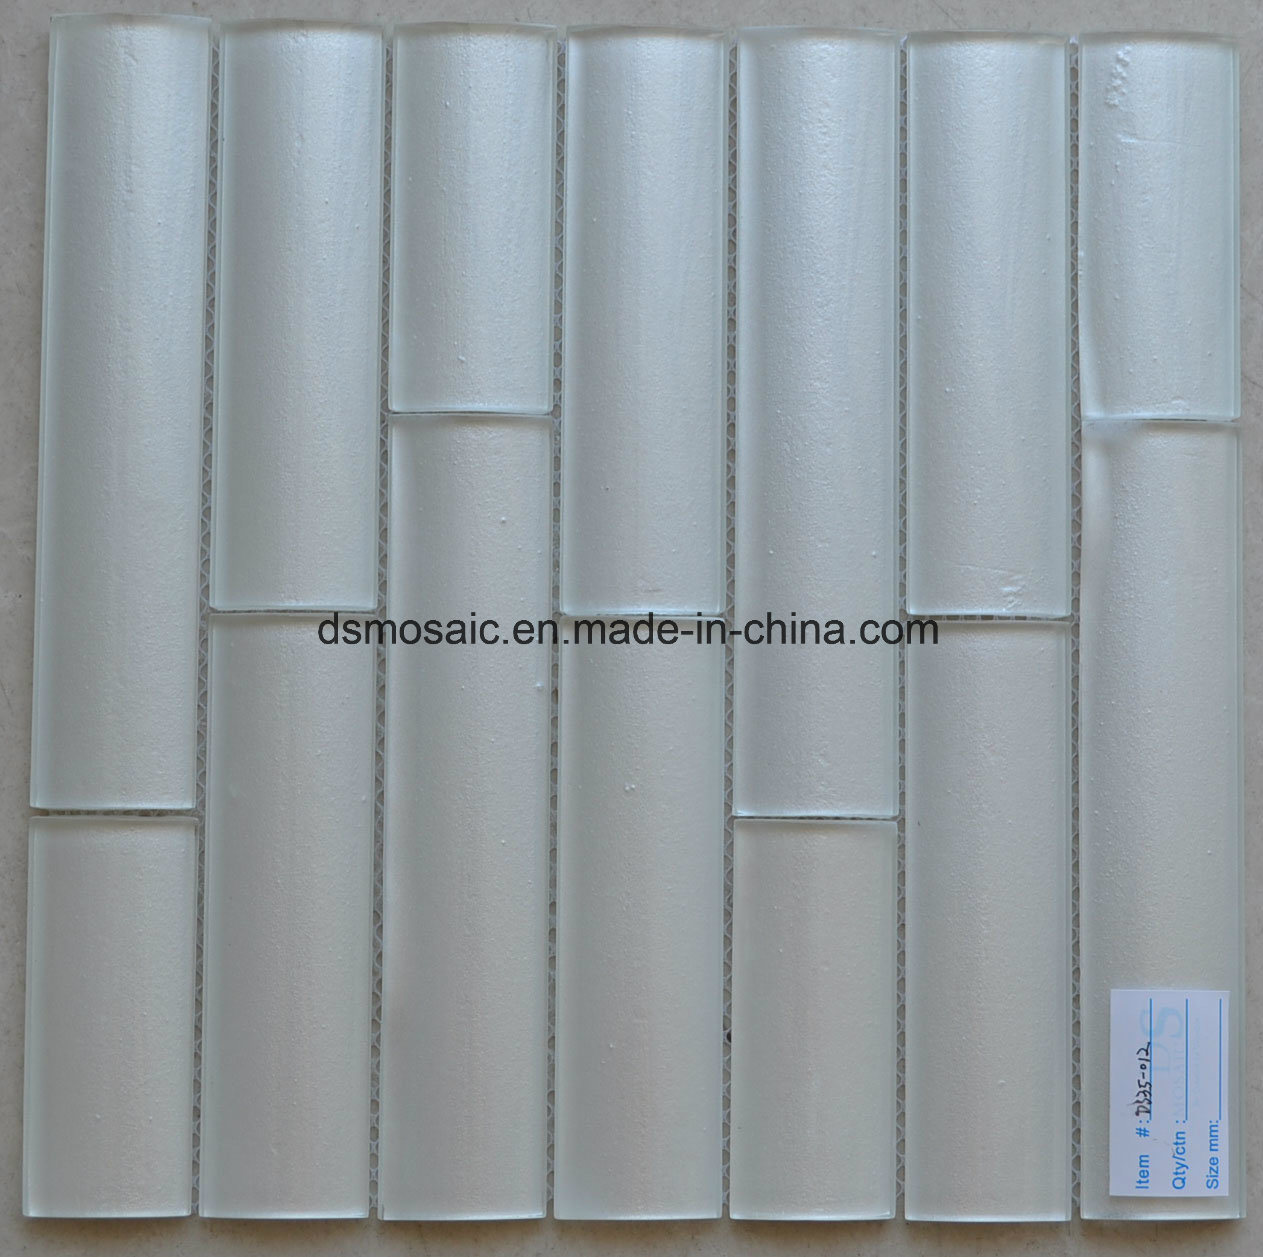 Hot Sale Bamboo Series Glass Mosaic Tile